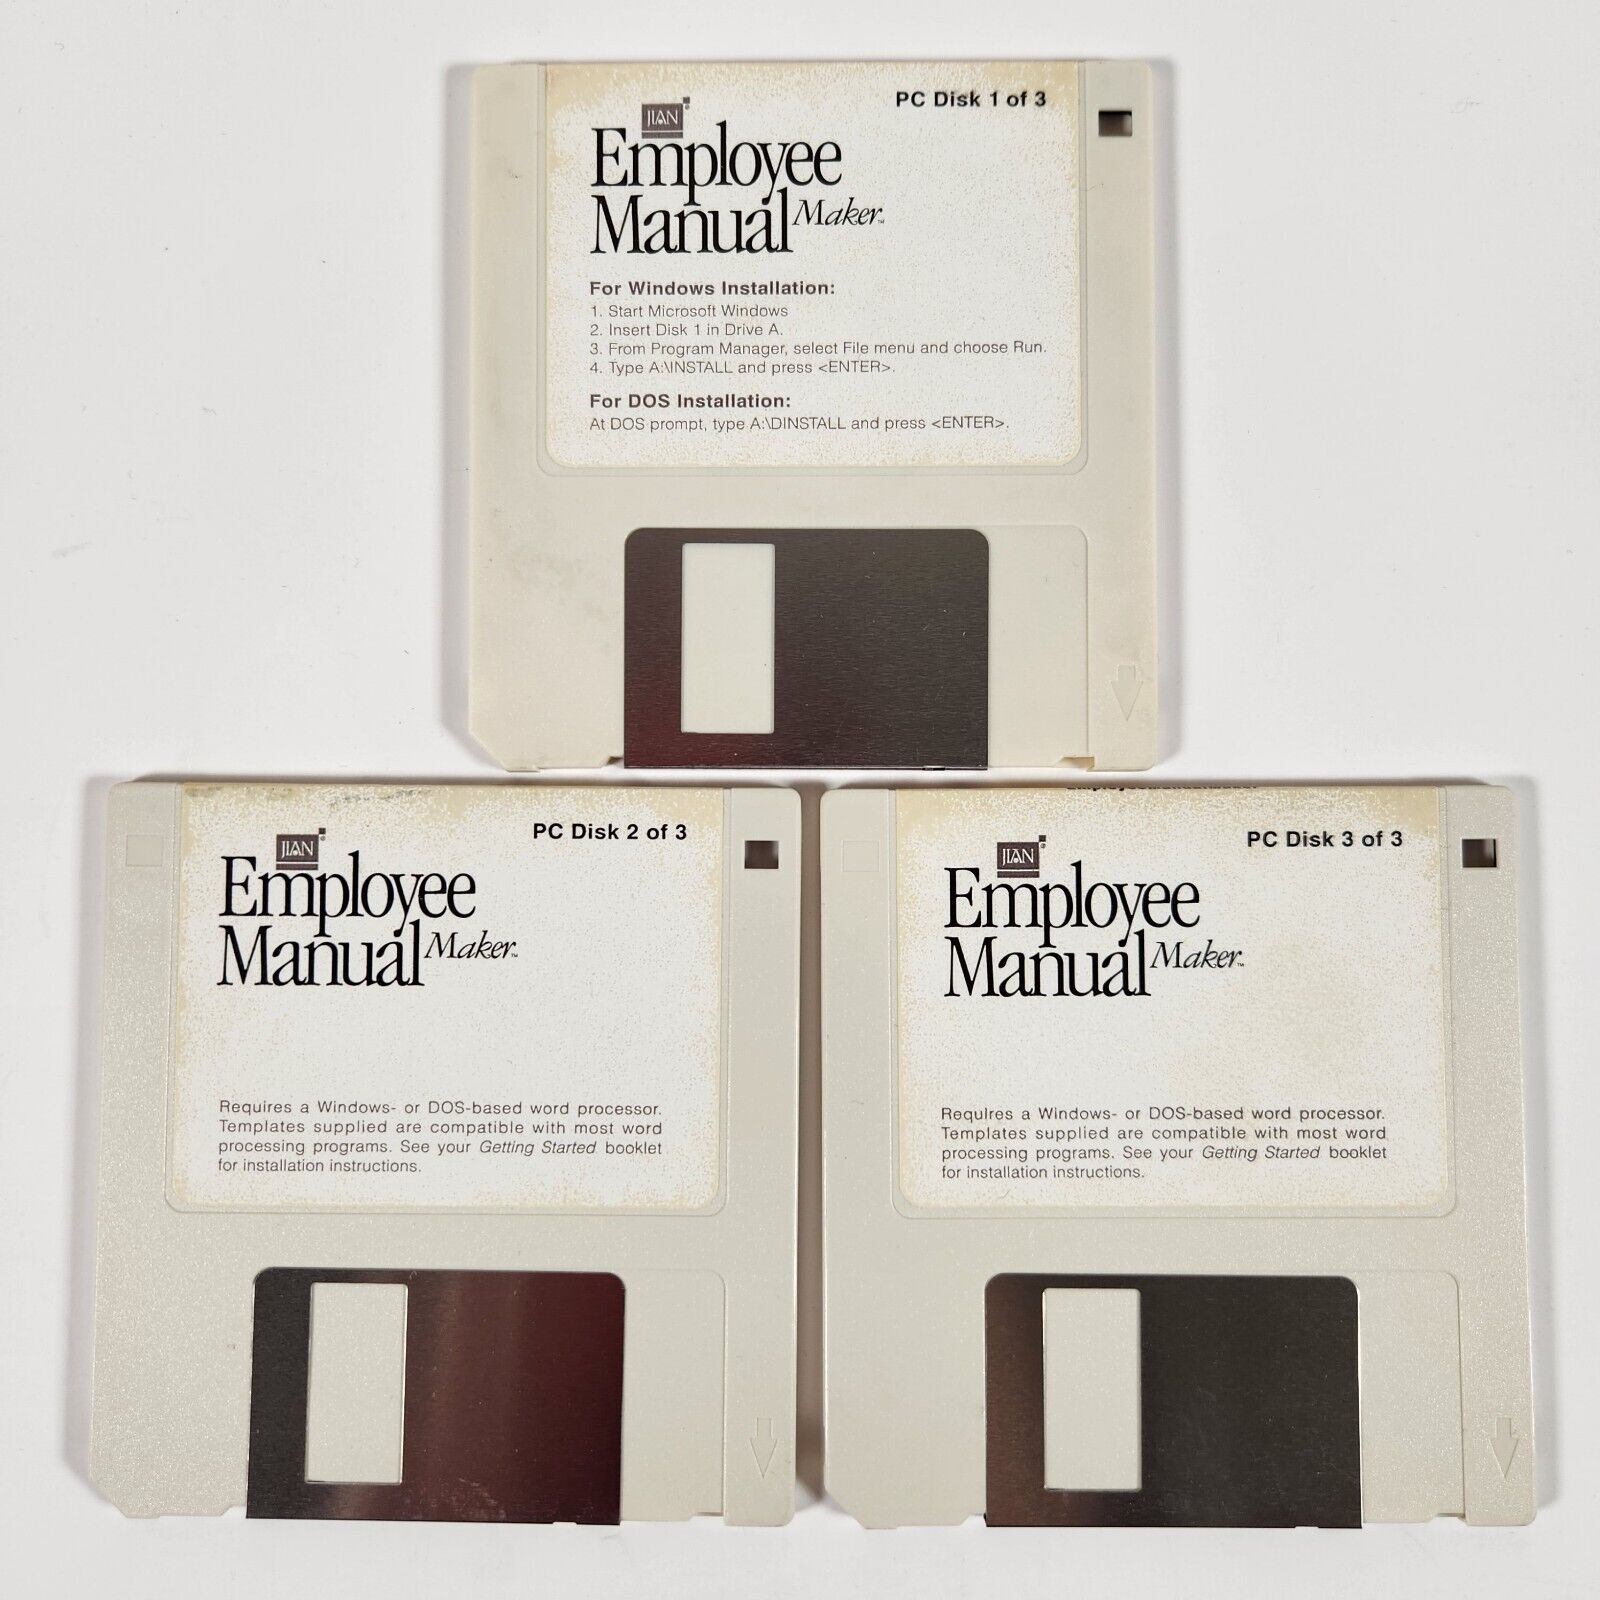 JLAN Employee Manual Maker Disks For Windows and DOS Floppy Disk